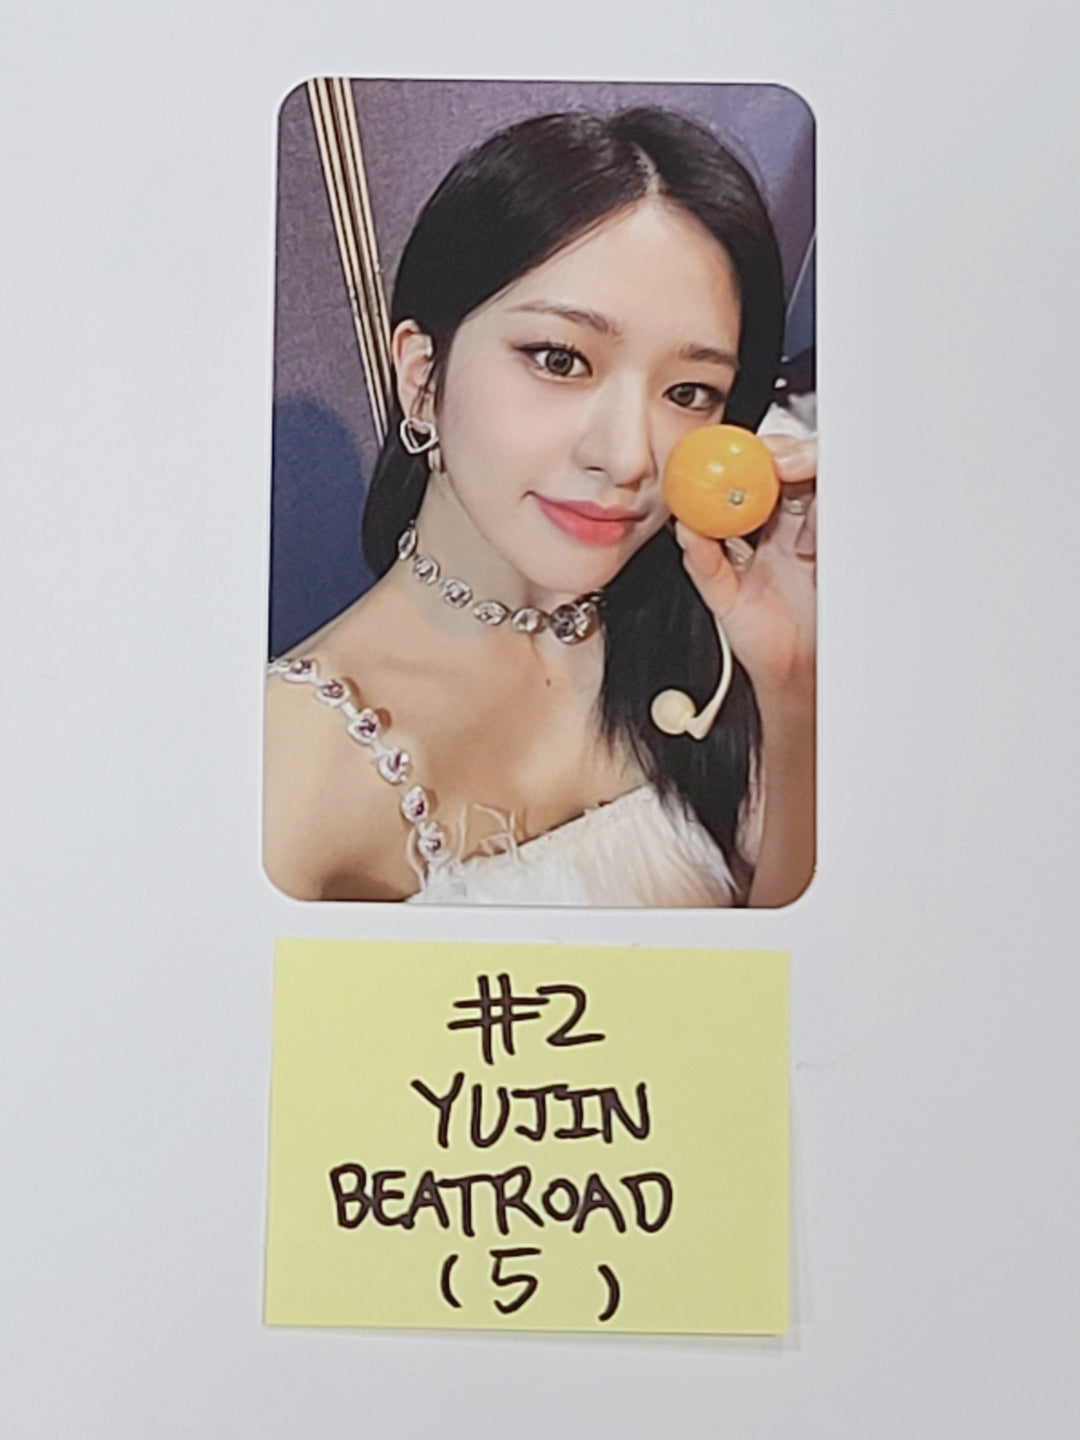 IVE 'LOVE DIVE' 2nd Single - Beatroad Fansign Event Photocard